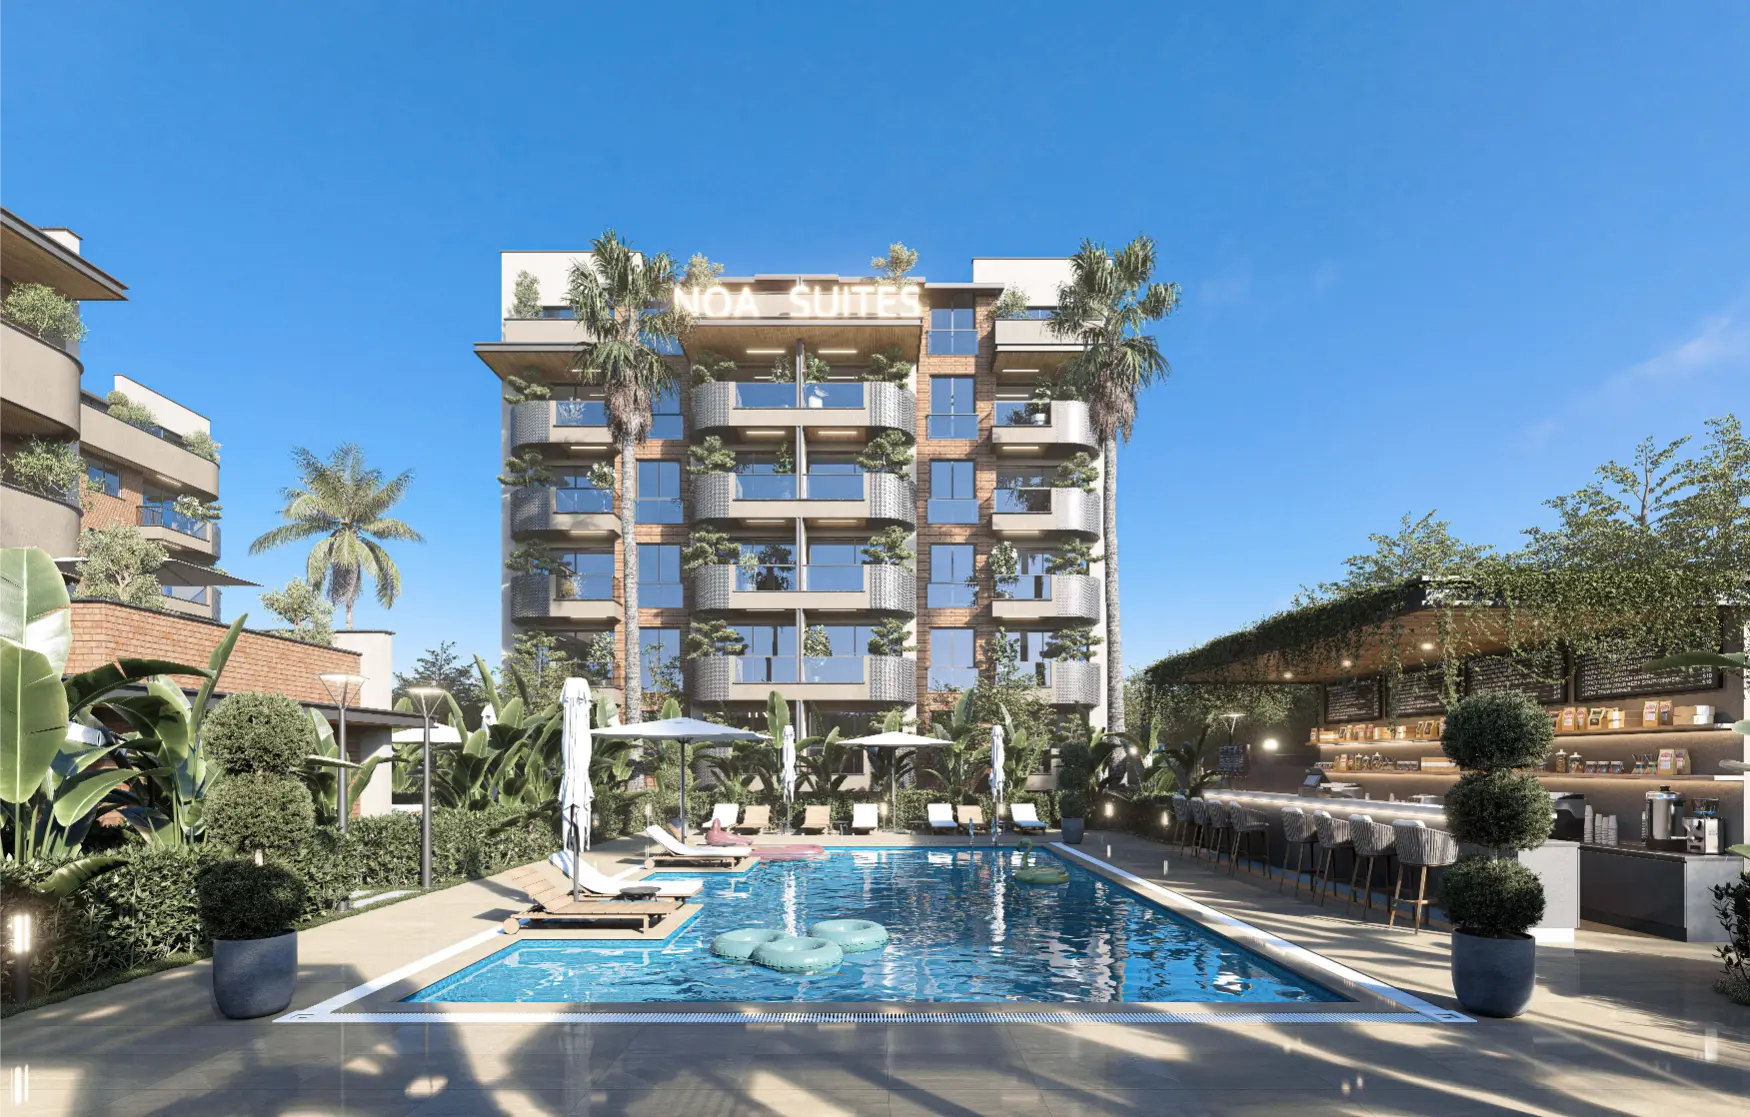 Luxury Apartments for Sale in Antalya with Two Pools